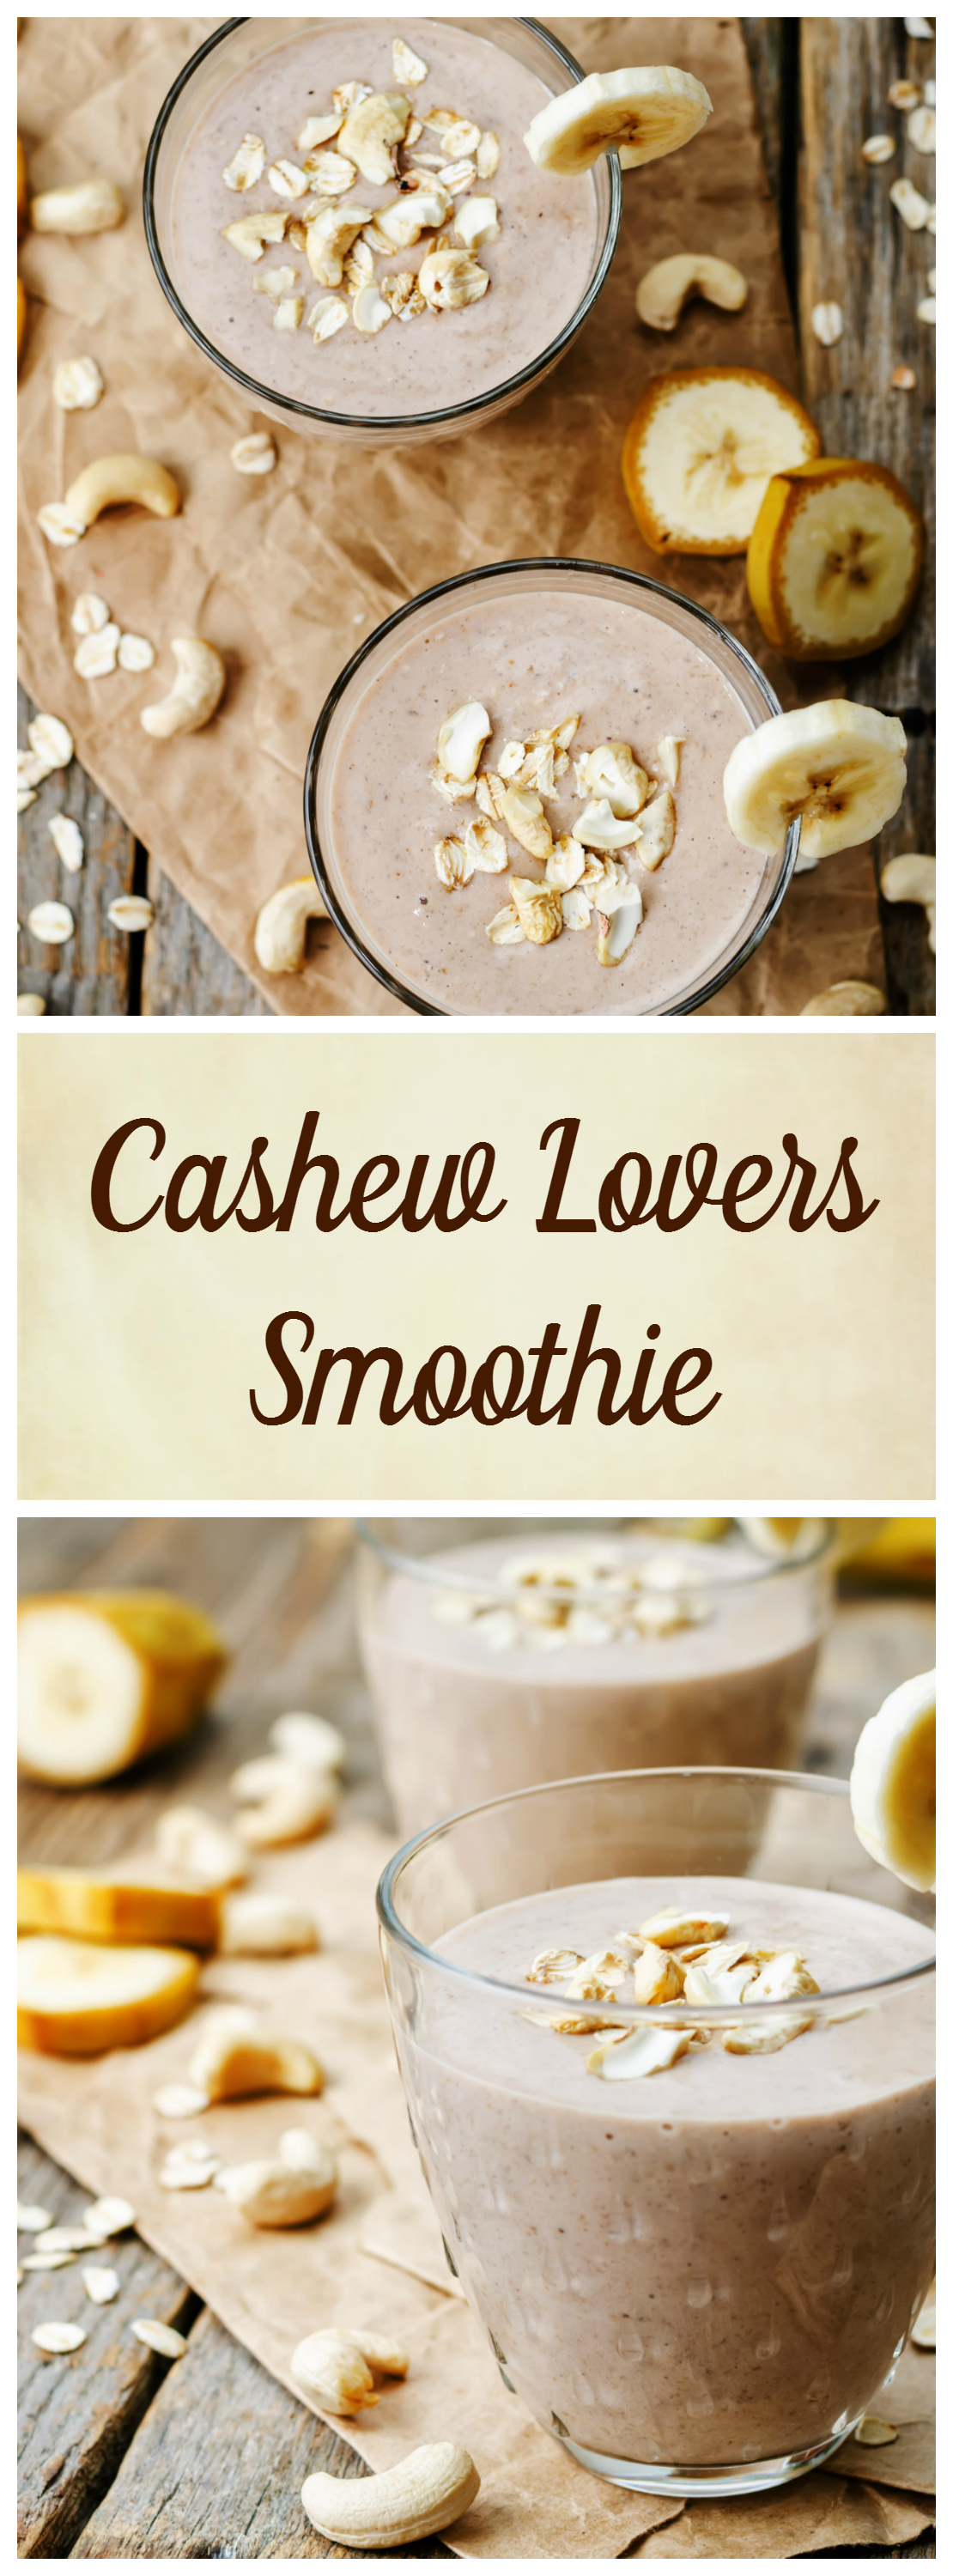 Creamy Cashew Lovers Smoothie - All Nutribullet Recipes